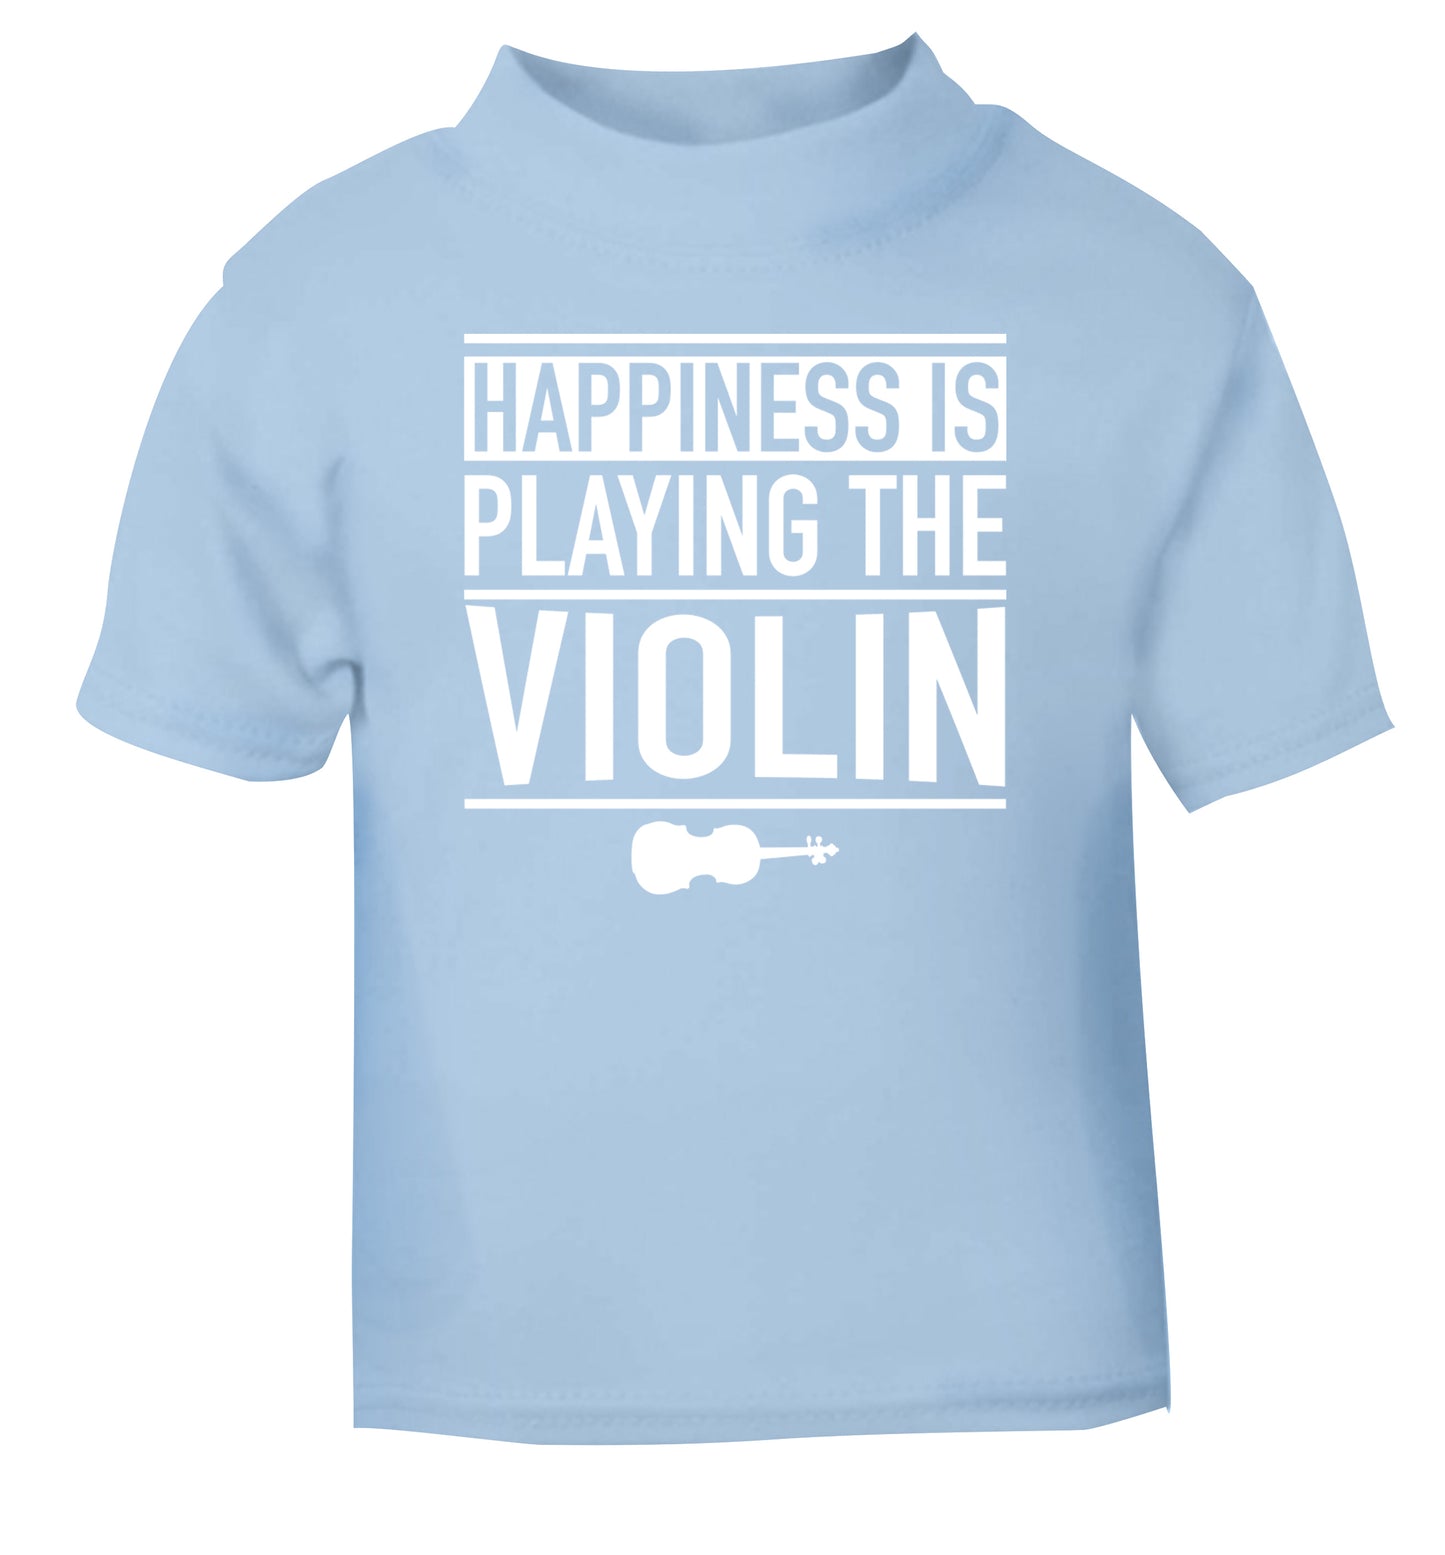 Happiness is playing the violin light blue Baby Toddler Tshirt 2 Years